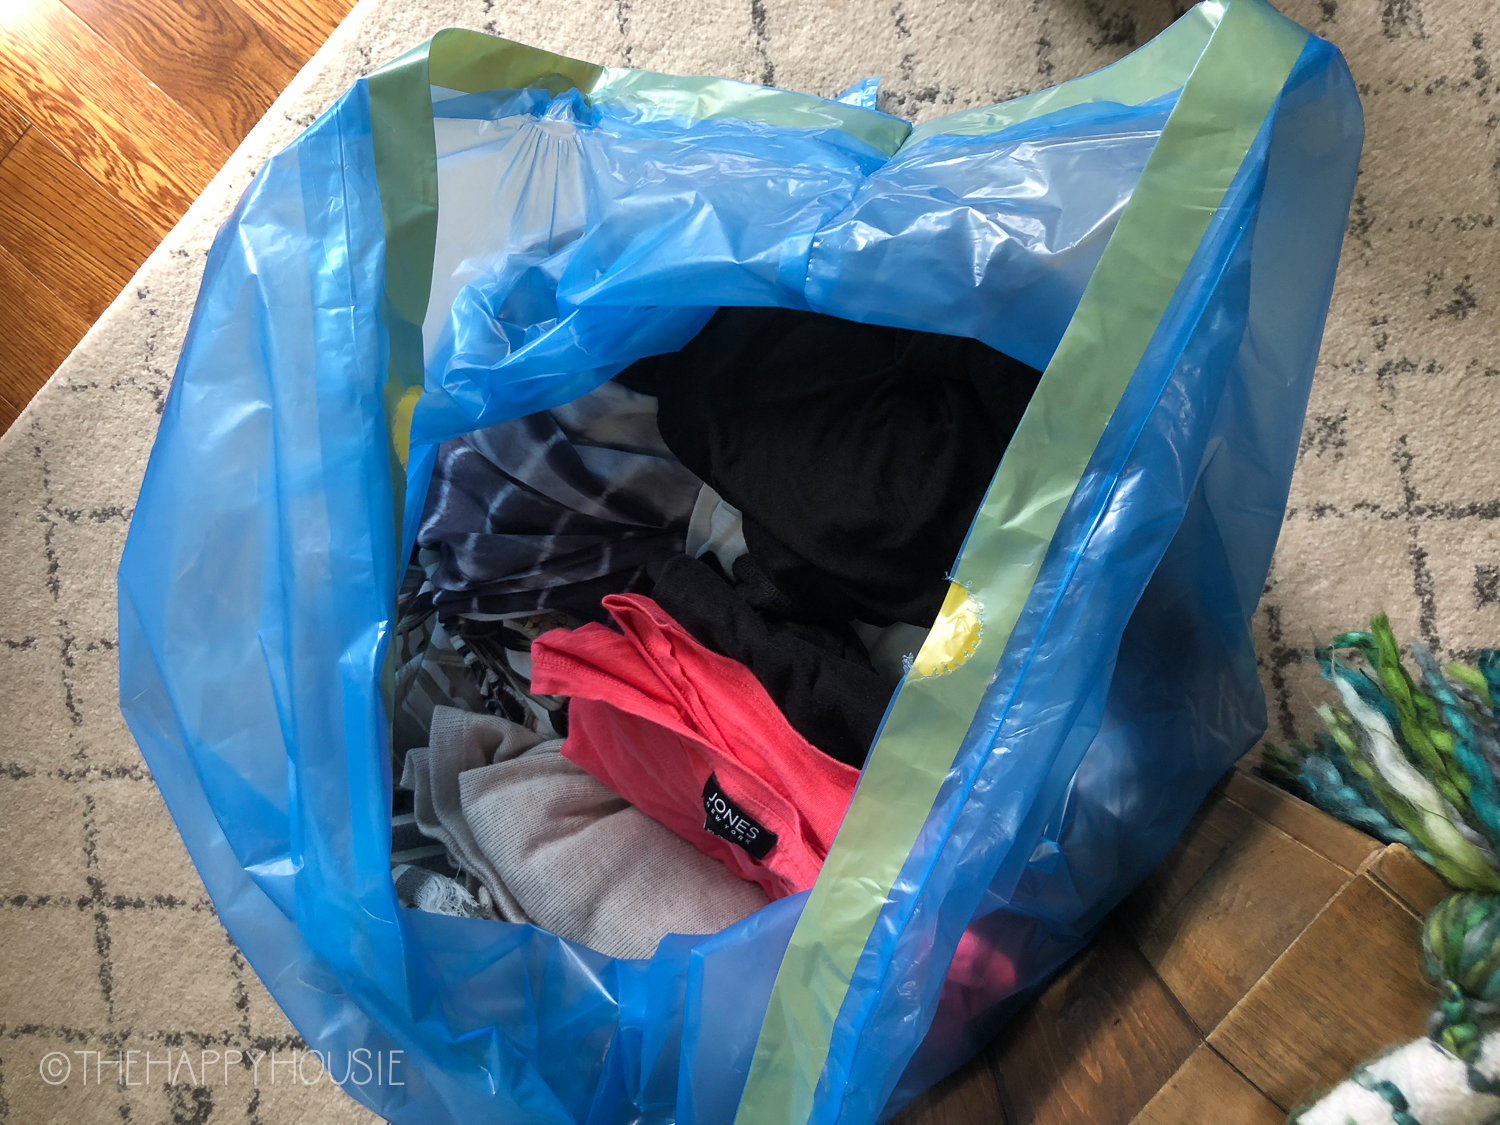 A bag full of clothes for donation.